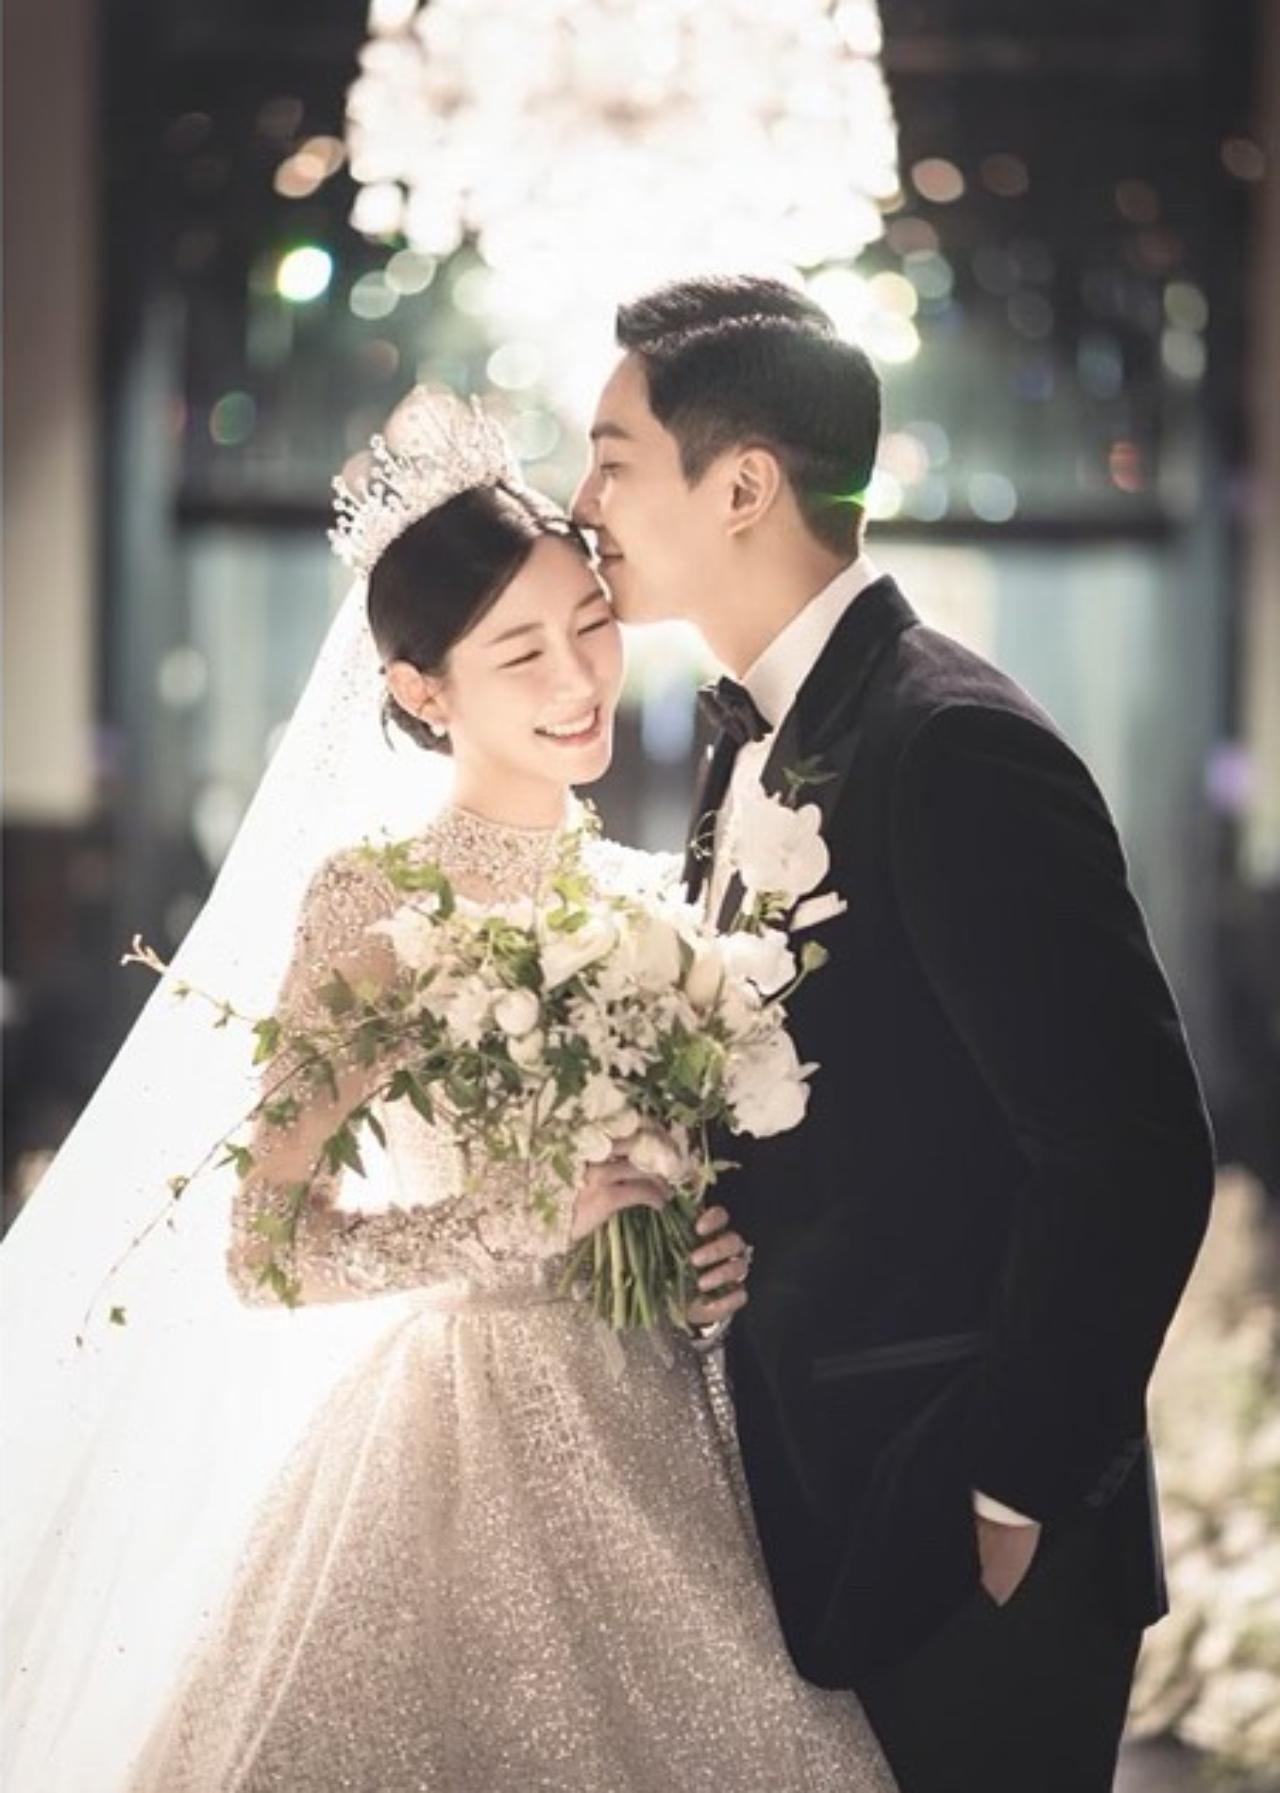 IN PHOTOS: Lee Seung-gi and Lee Da-in tie the knot in a dreamy wedding ...